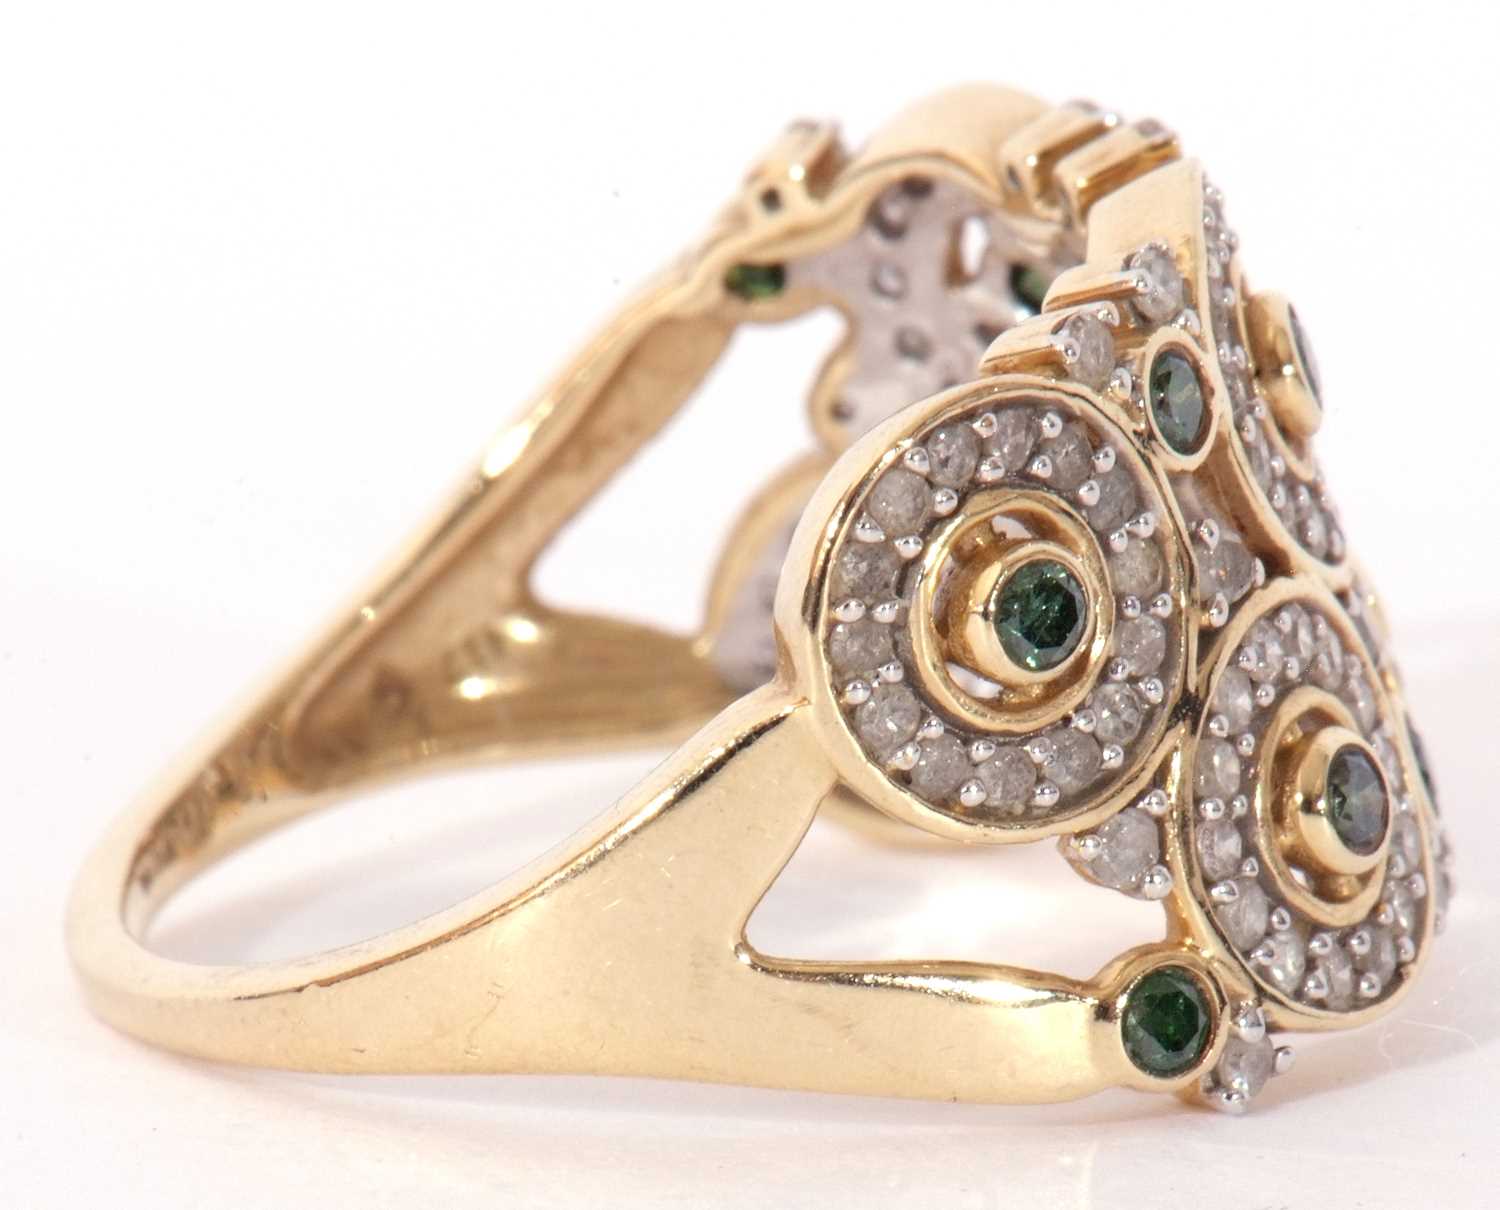 Modern 9ct gold, diamond and green stone set ring, a design featuring six small diamond set discs - Image 6 of 10